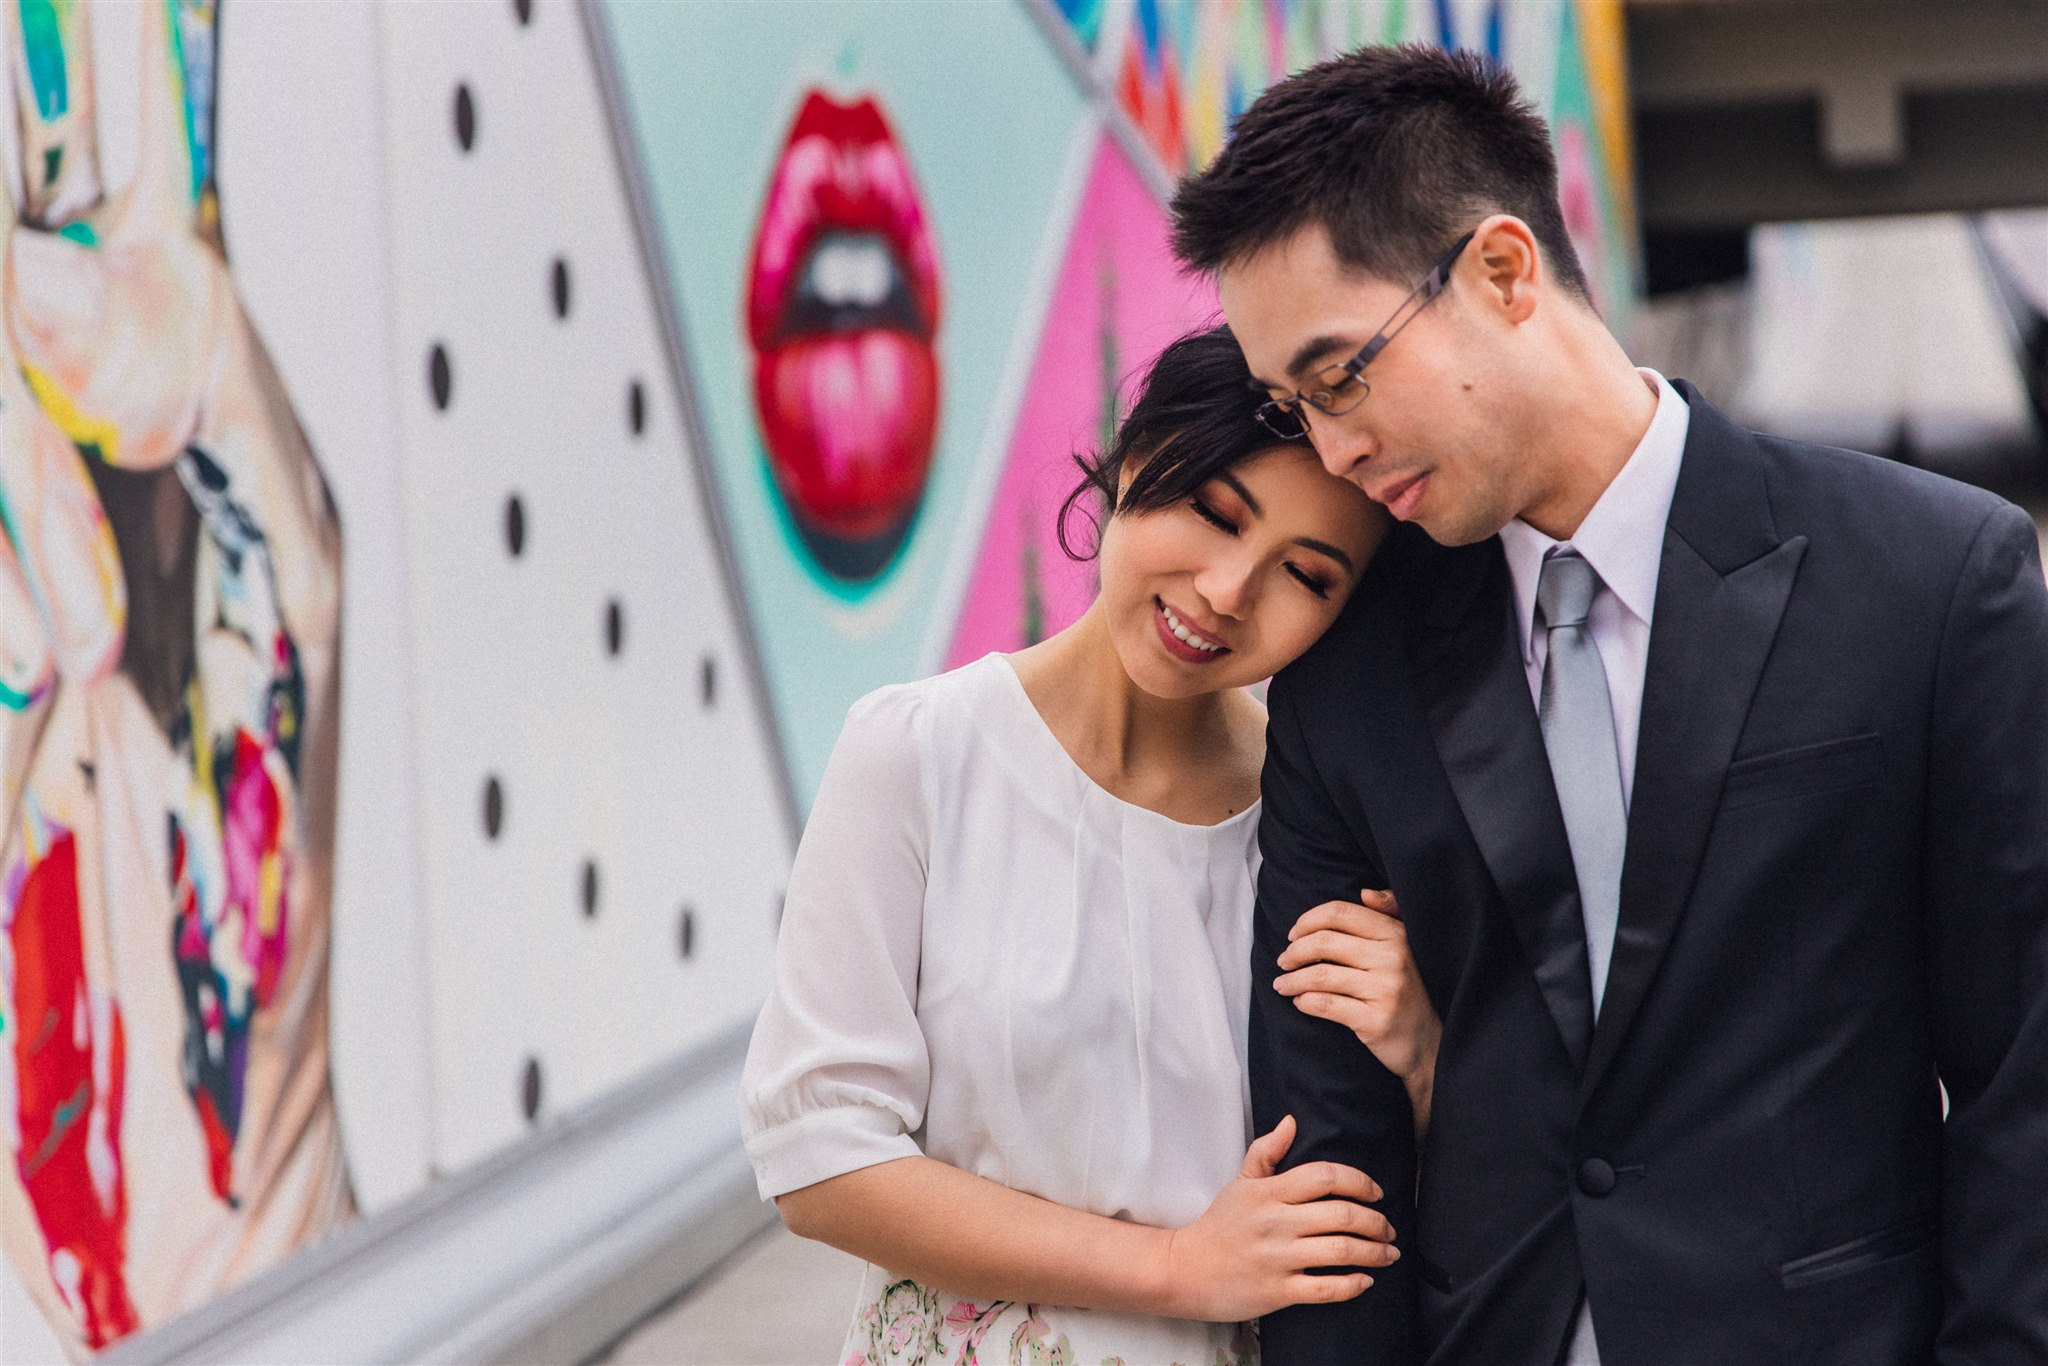 urban downtown calgary engagement session